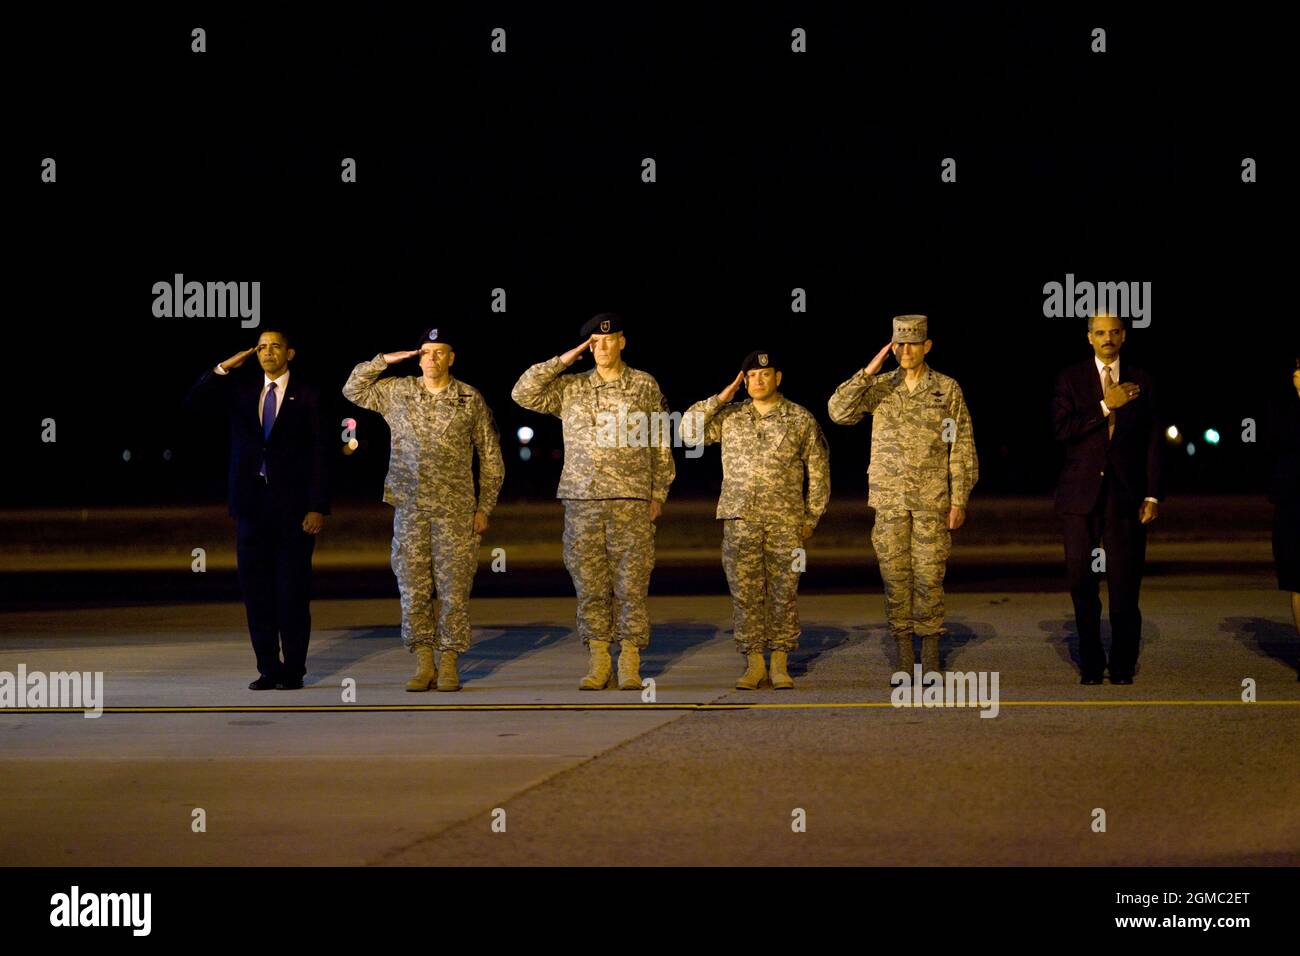 Oct. 29, 2009“This photo was taken about 4AM after the President made an unannounced trip to Dover Air Force Base to pay respects to fallen troops coming back from Afghanistan. After meeting privately with the families, the President walked alone up the ramp of the cargo plane carrying the 18 caskets, all draped in American flags. I could see the emotion on his face as he walked from casket to casket, leaving a Presidential coin on each. When he was done, he paused for a few minutes, head bowed in prayer. I heard him tell others later how that was the most difficult moment of his Presidency th Stock Photo